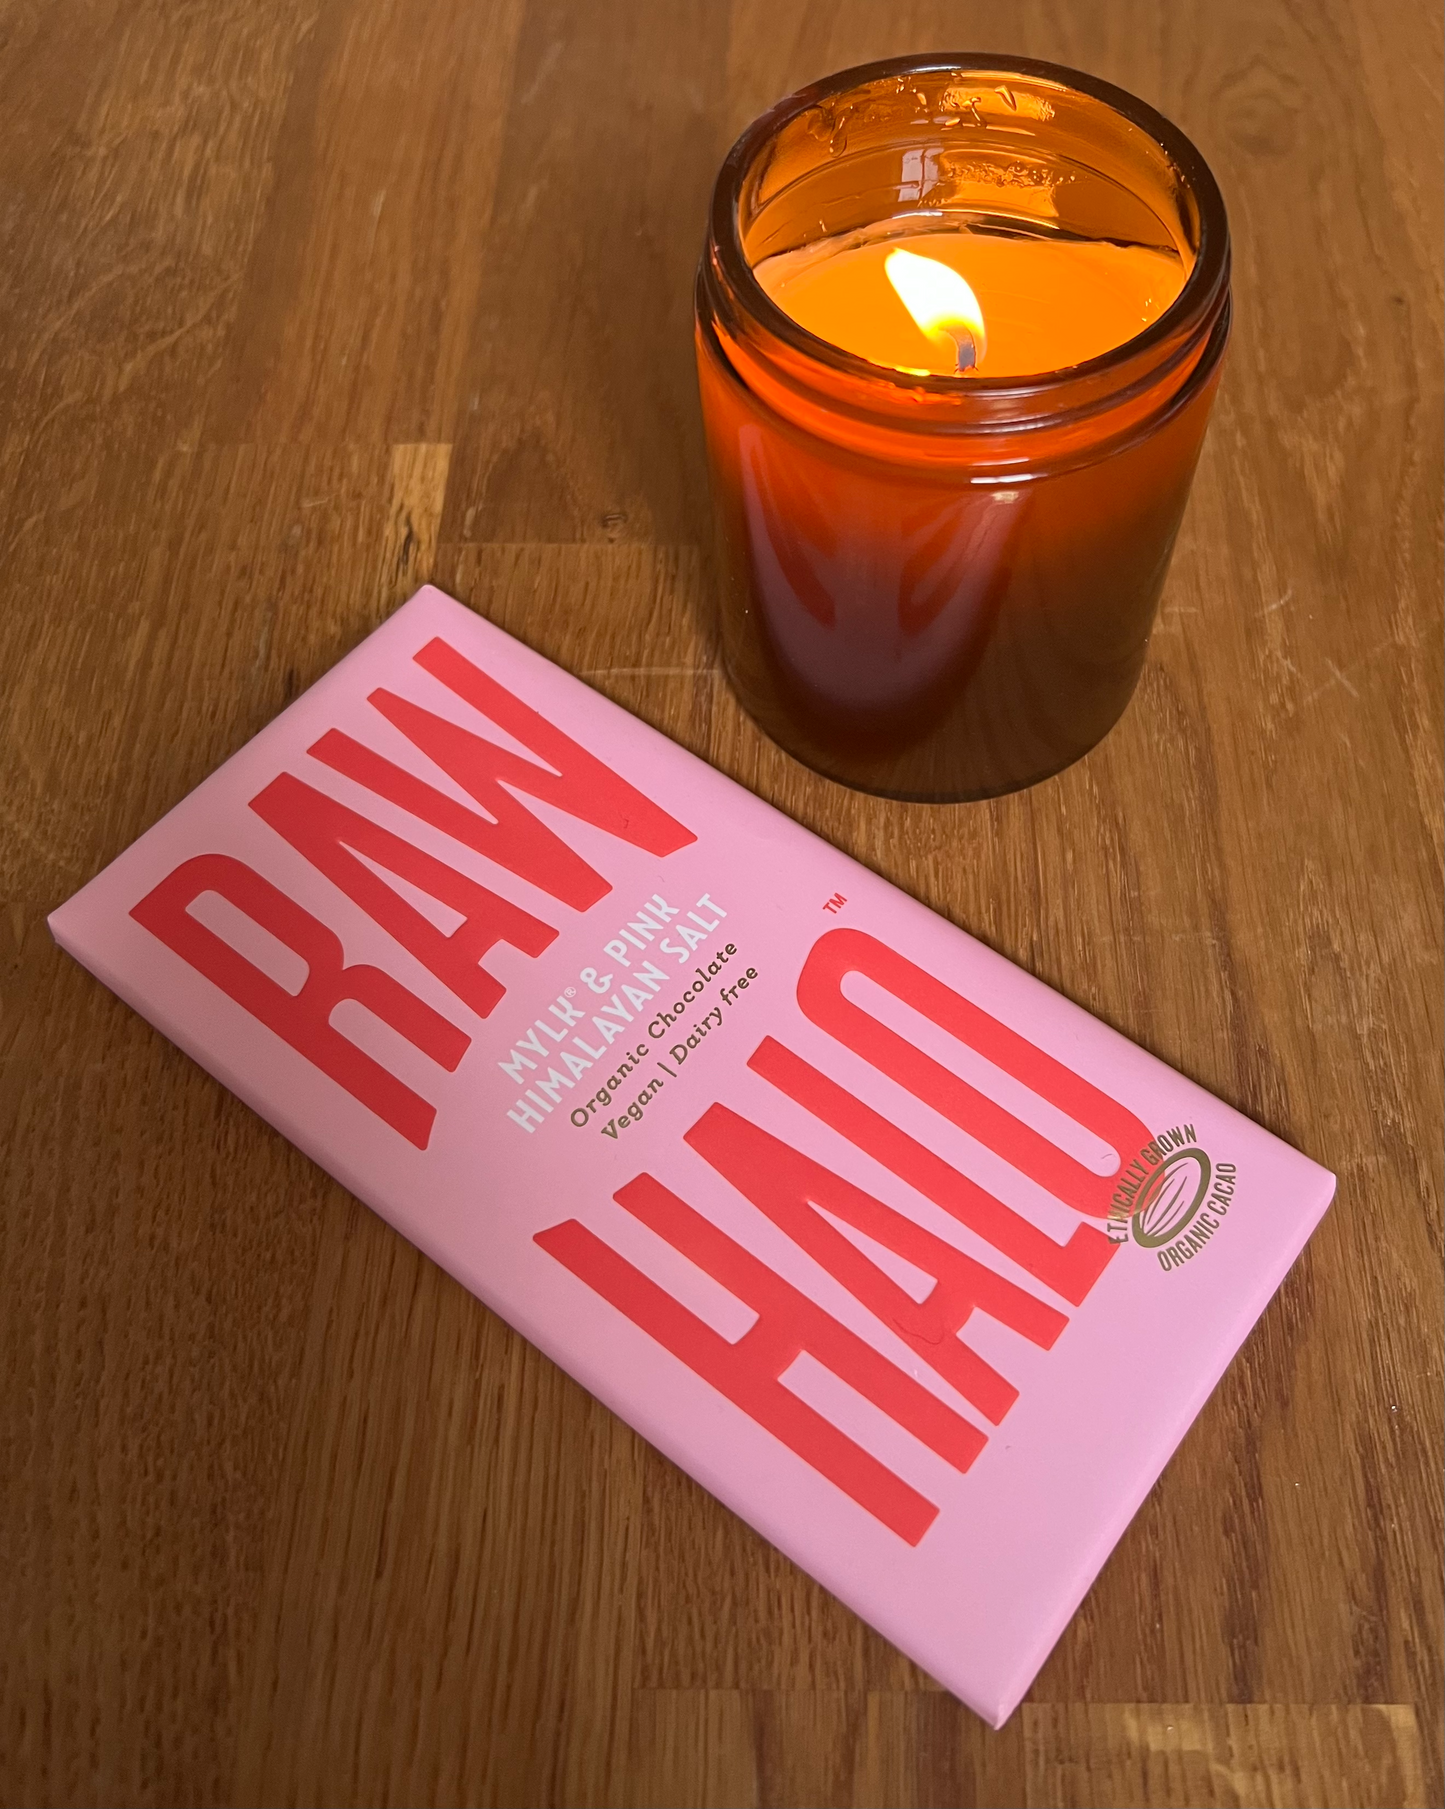  The image depicts a lit amber glass candle next to a pink RAW HALO Mylk & Pink Himalayan Salt organic chocolate bar. The candle is on the right, glowing warmly on a wooden surface, while the chocolate bar lies flat on the left with prominent red branding. The scene suggests a cozy and indulgent atmosphere.